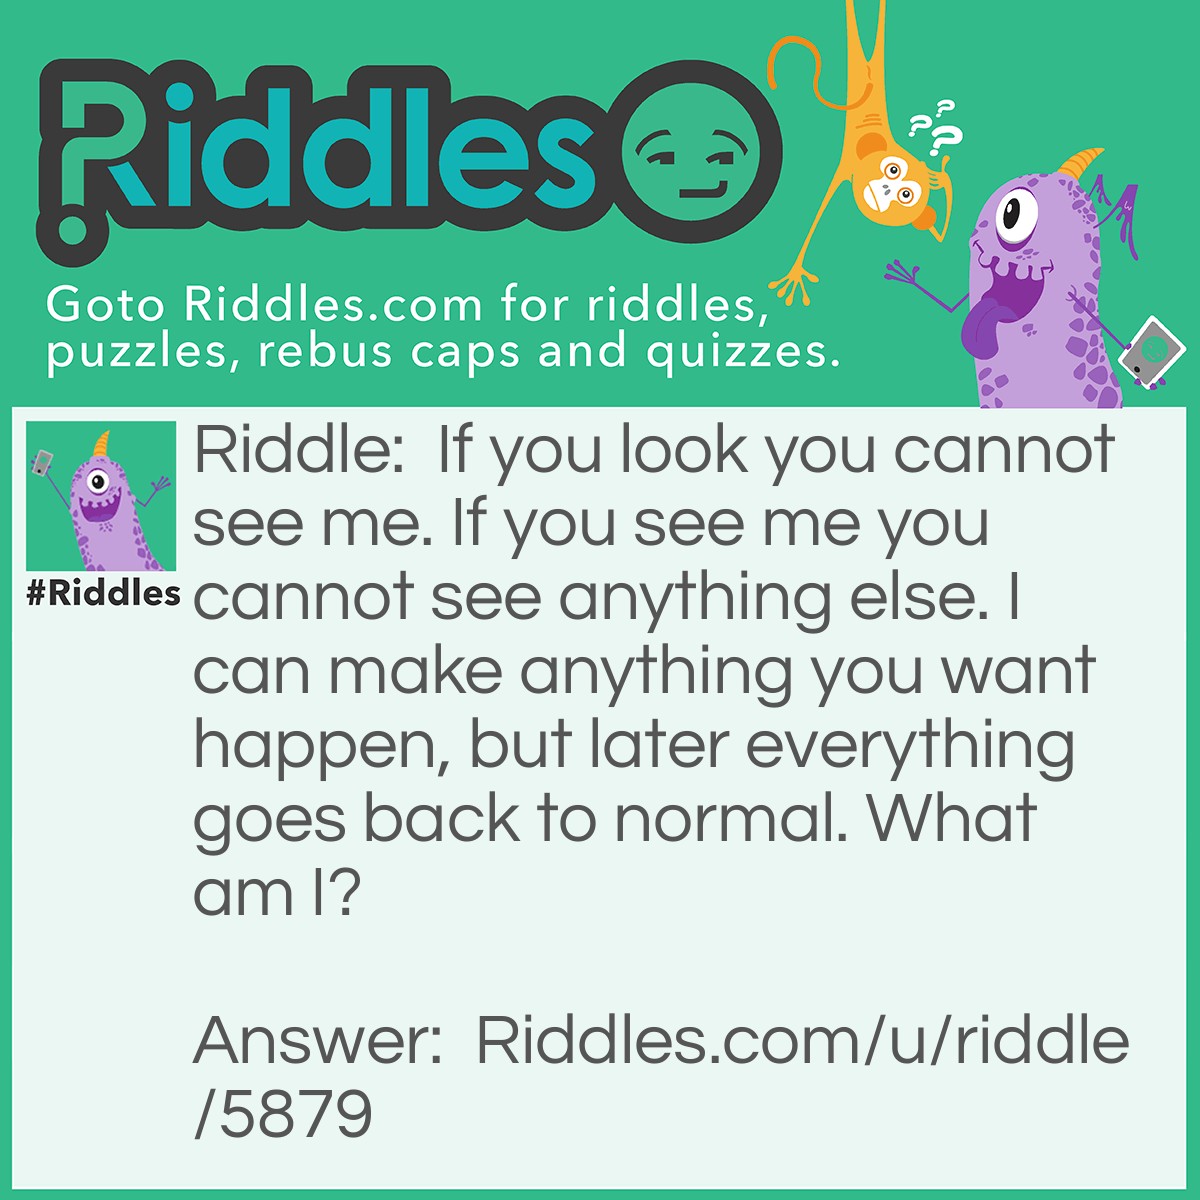 Riddle: If you look you cannot see me. If you see me you cannot see anything else. I can make anything you want happen, but later everything goes back to normal. What am I? Answer: Your imagination.